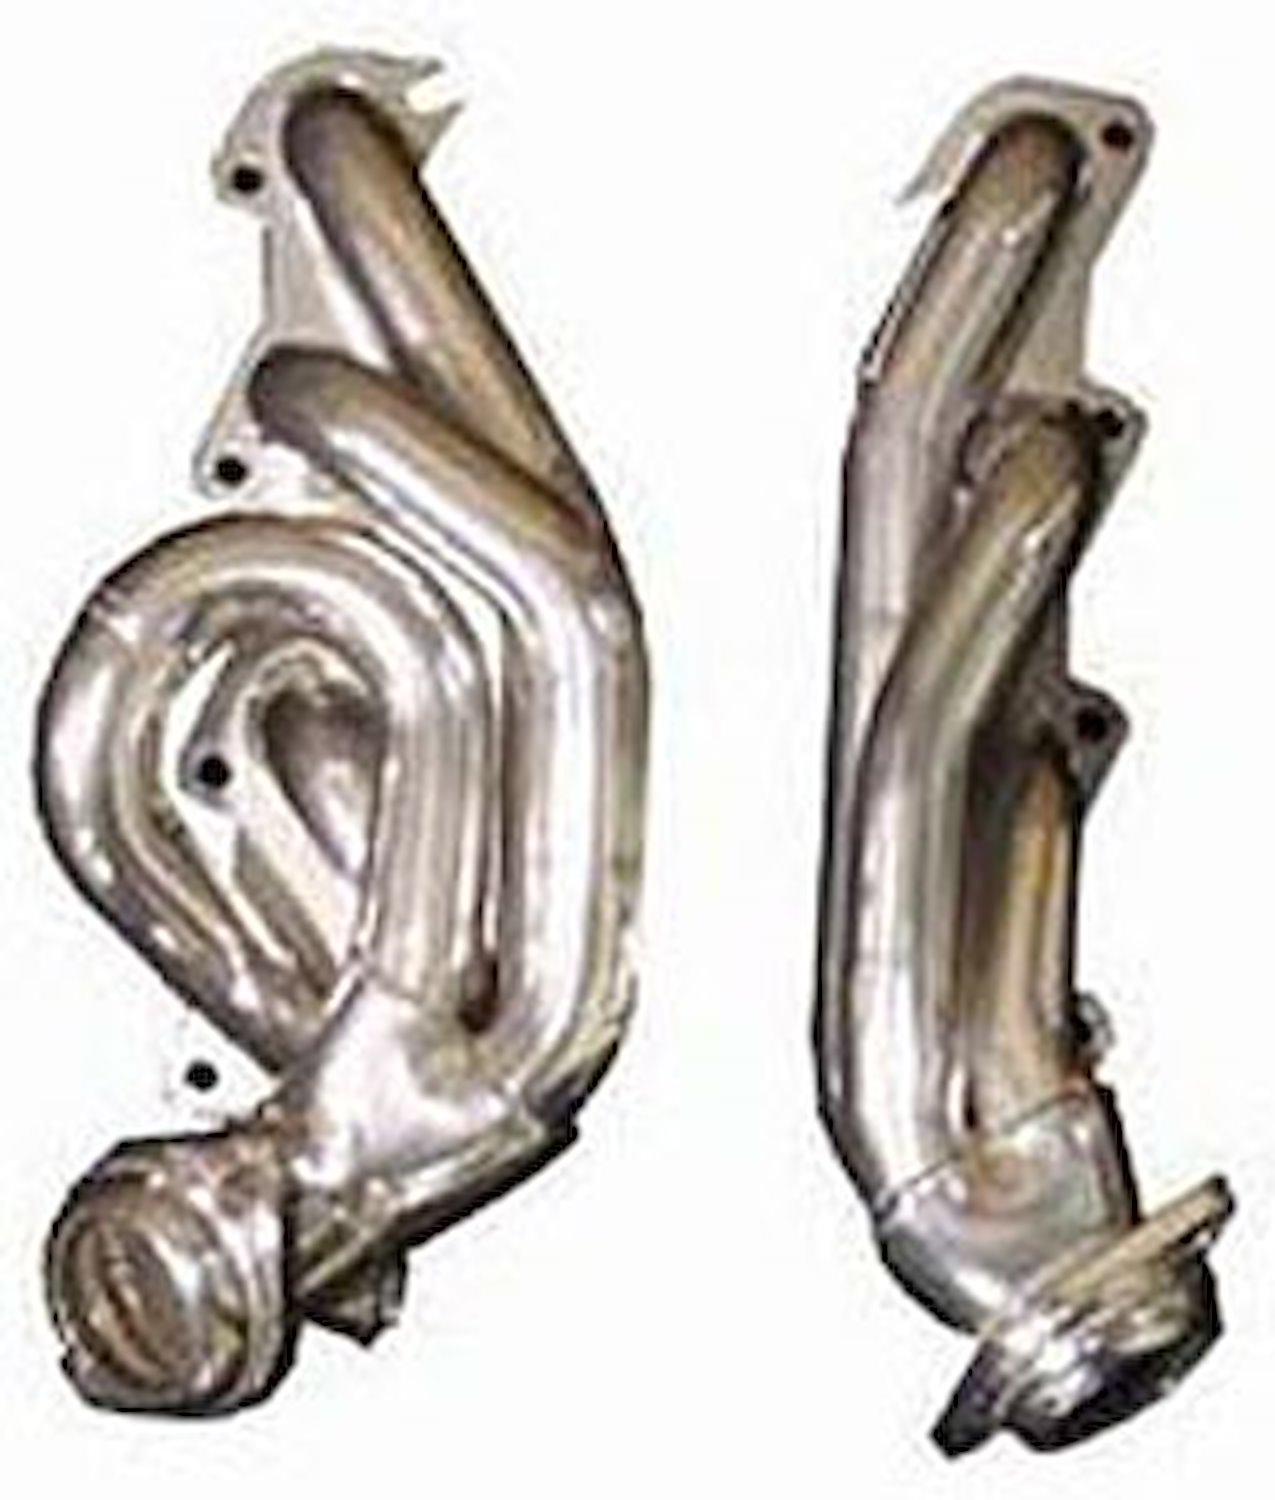 Stainless Steel Truck Headers 1997-2003 Expedition 5.4L